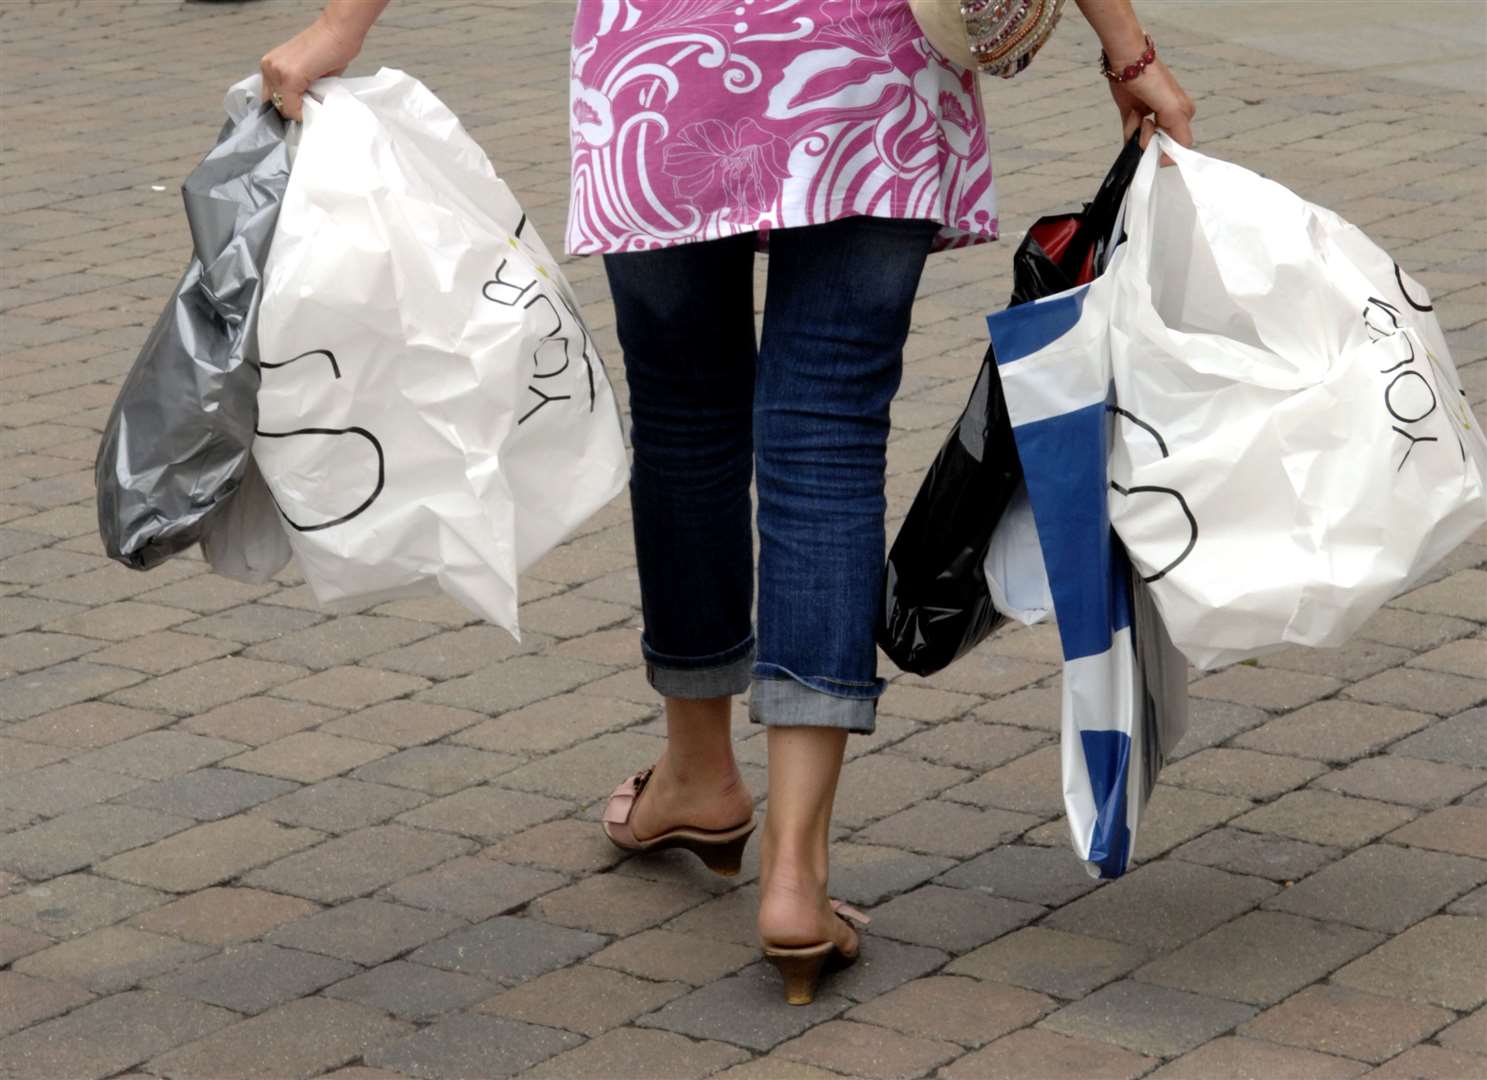 All shops will charge 10p for carrier bags from May 21